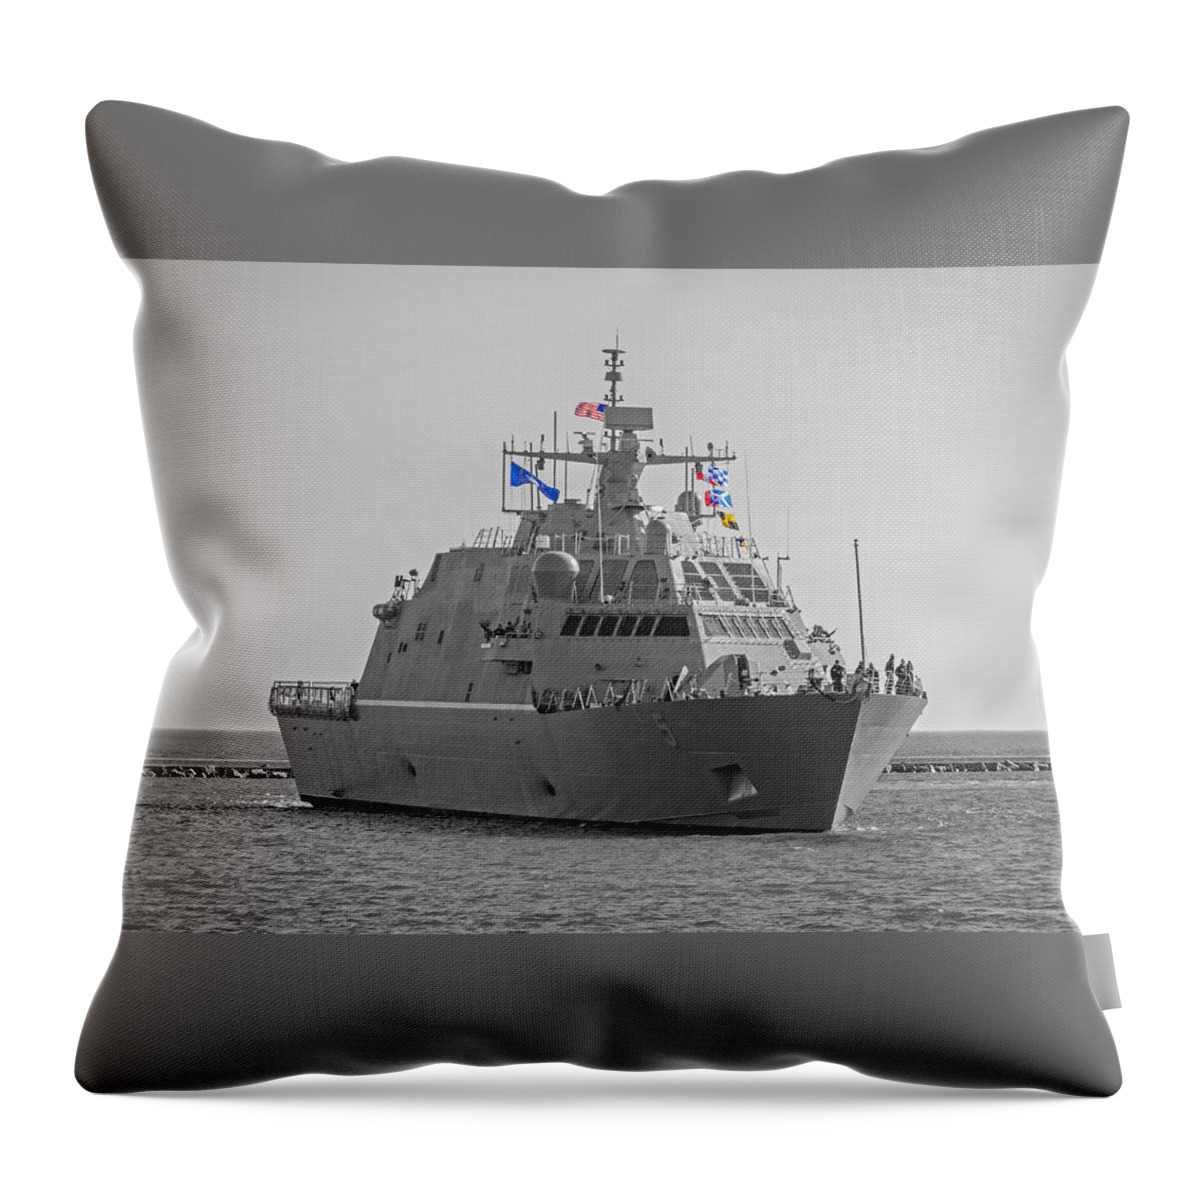 Uss Milwaukee 3 - United States Navy Throw Pillow featuring the photograph USS MIlwaukee 3 by Susan McMenamin